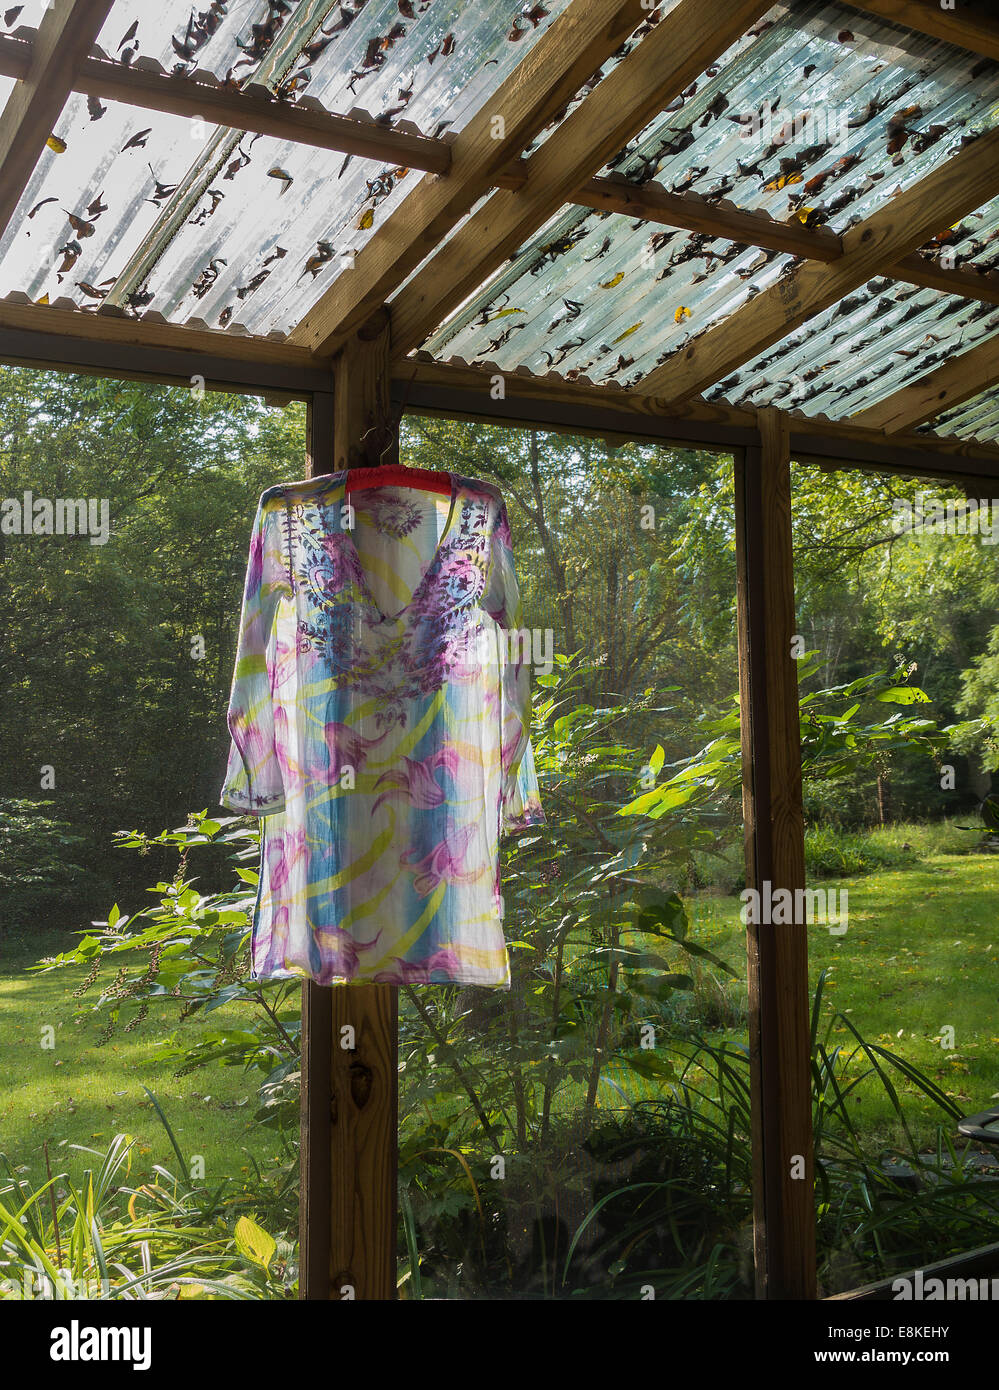 dress drying on hanger in screened porch Stock Photo